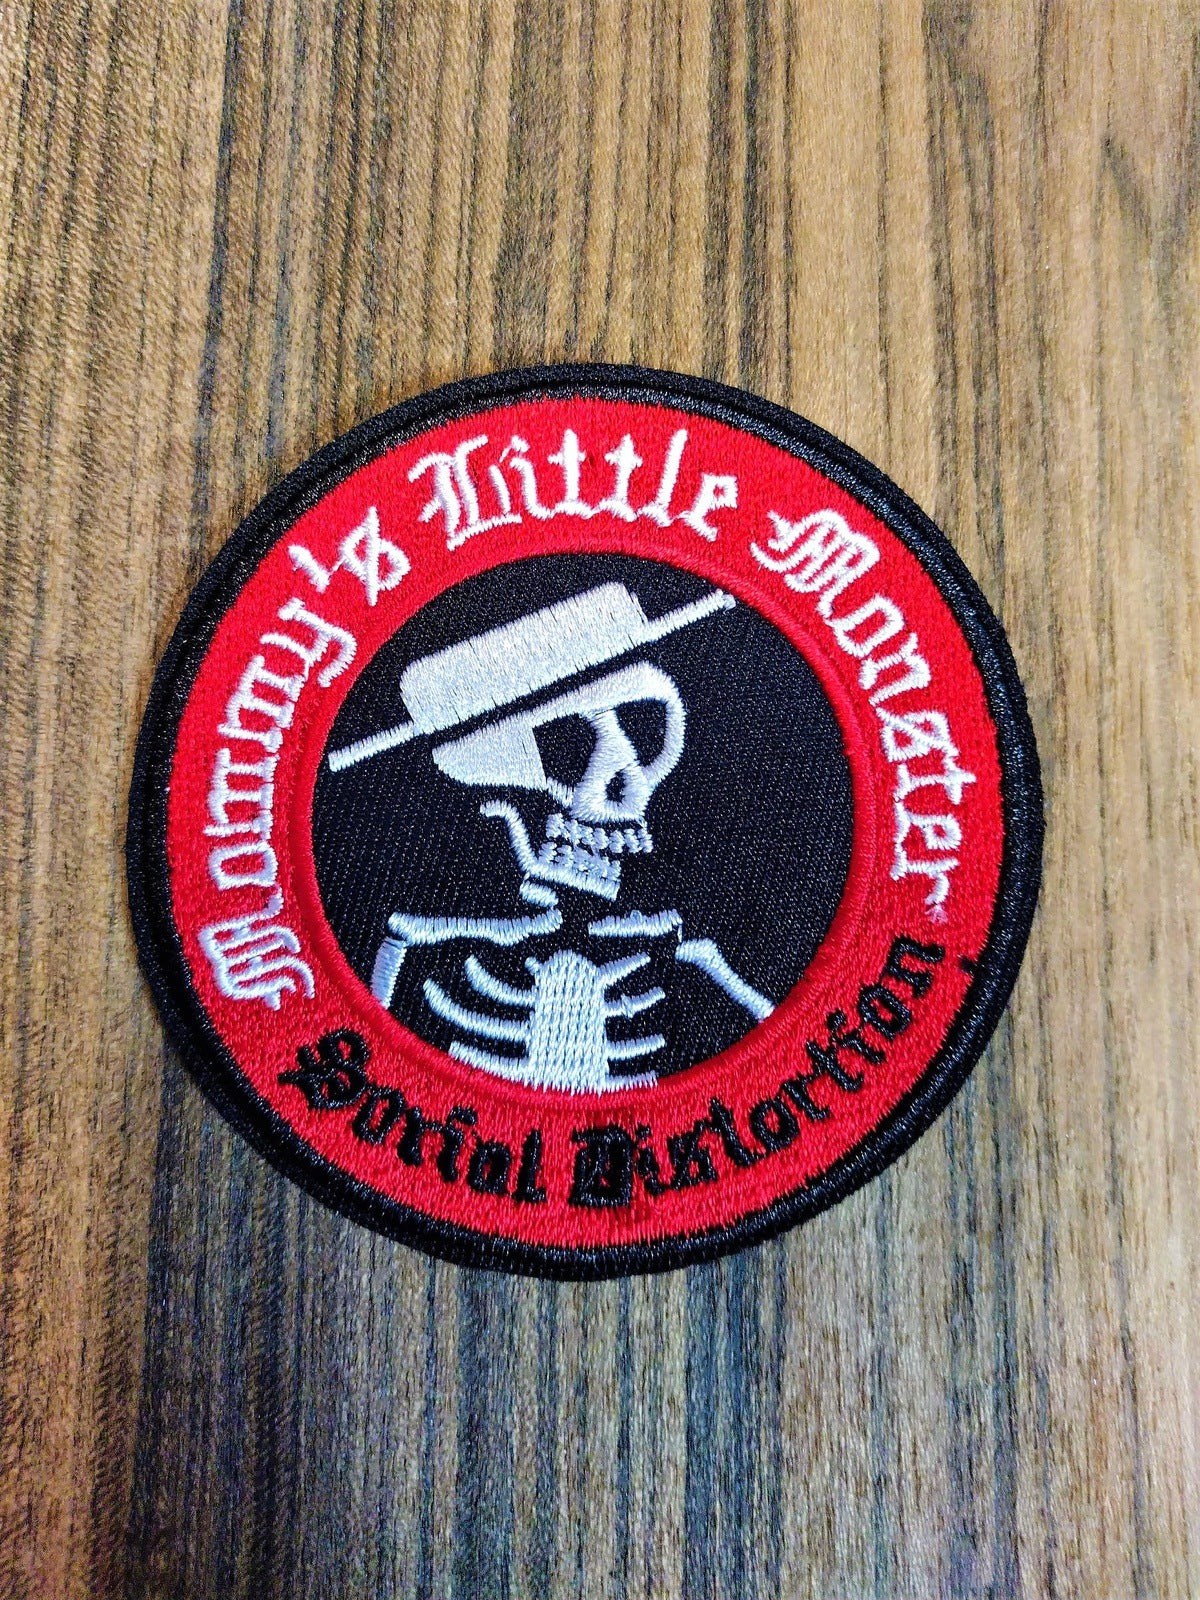 Social Distortion Mommy's Little Monster Patch approx. 3 inches